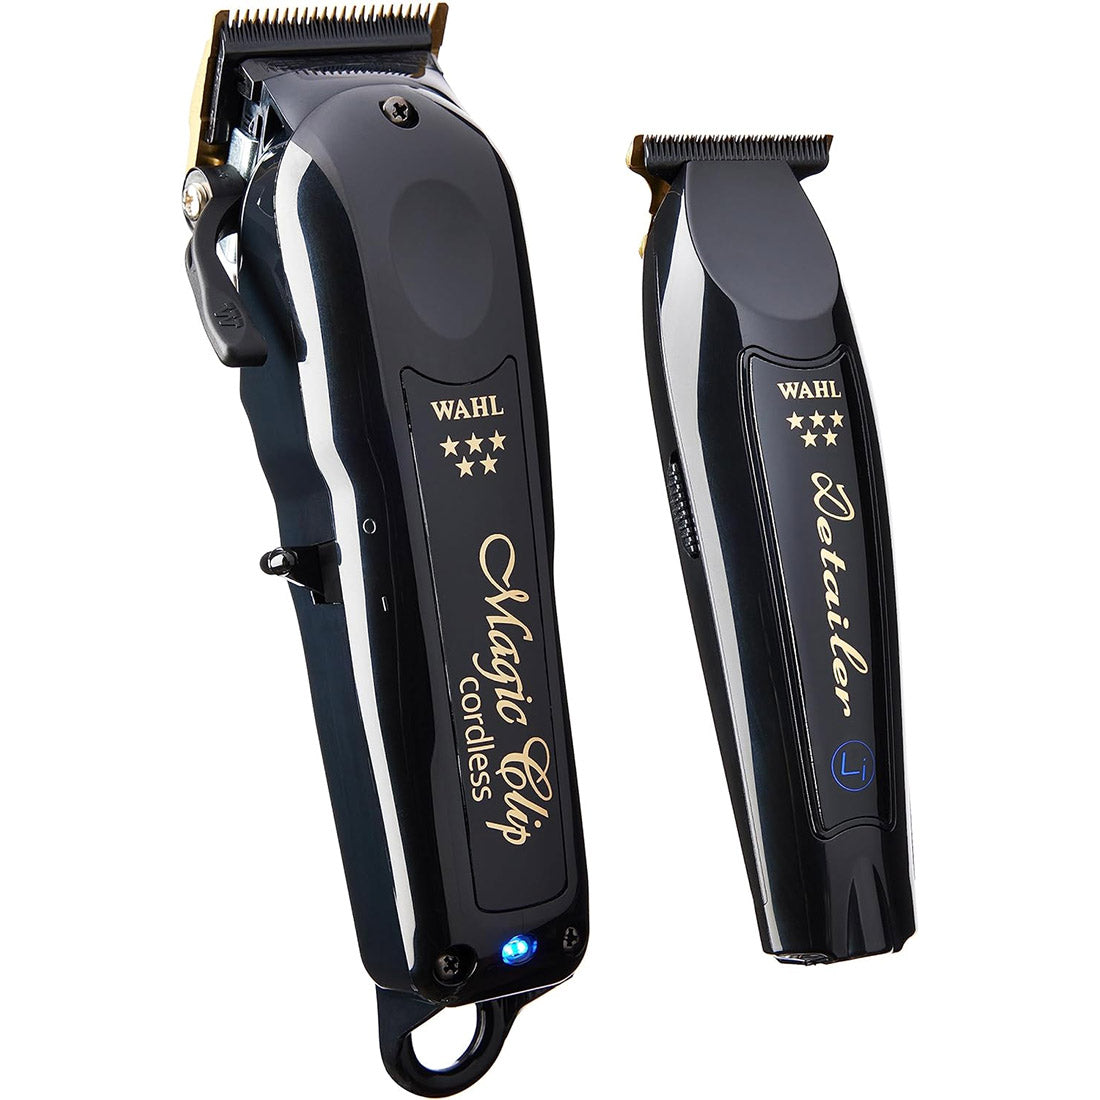 Wahl 5 Star Cordless Magic Clip Clipper and Detailer Trimmer